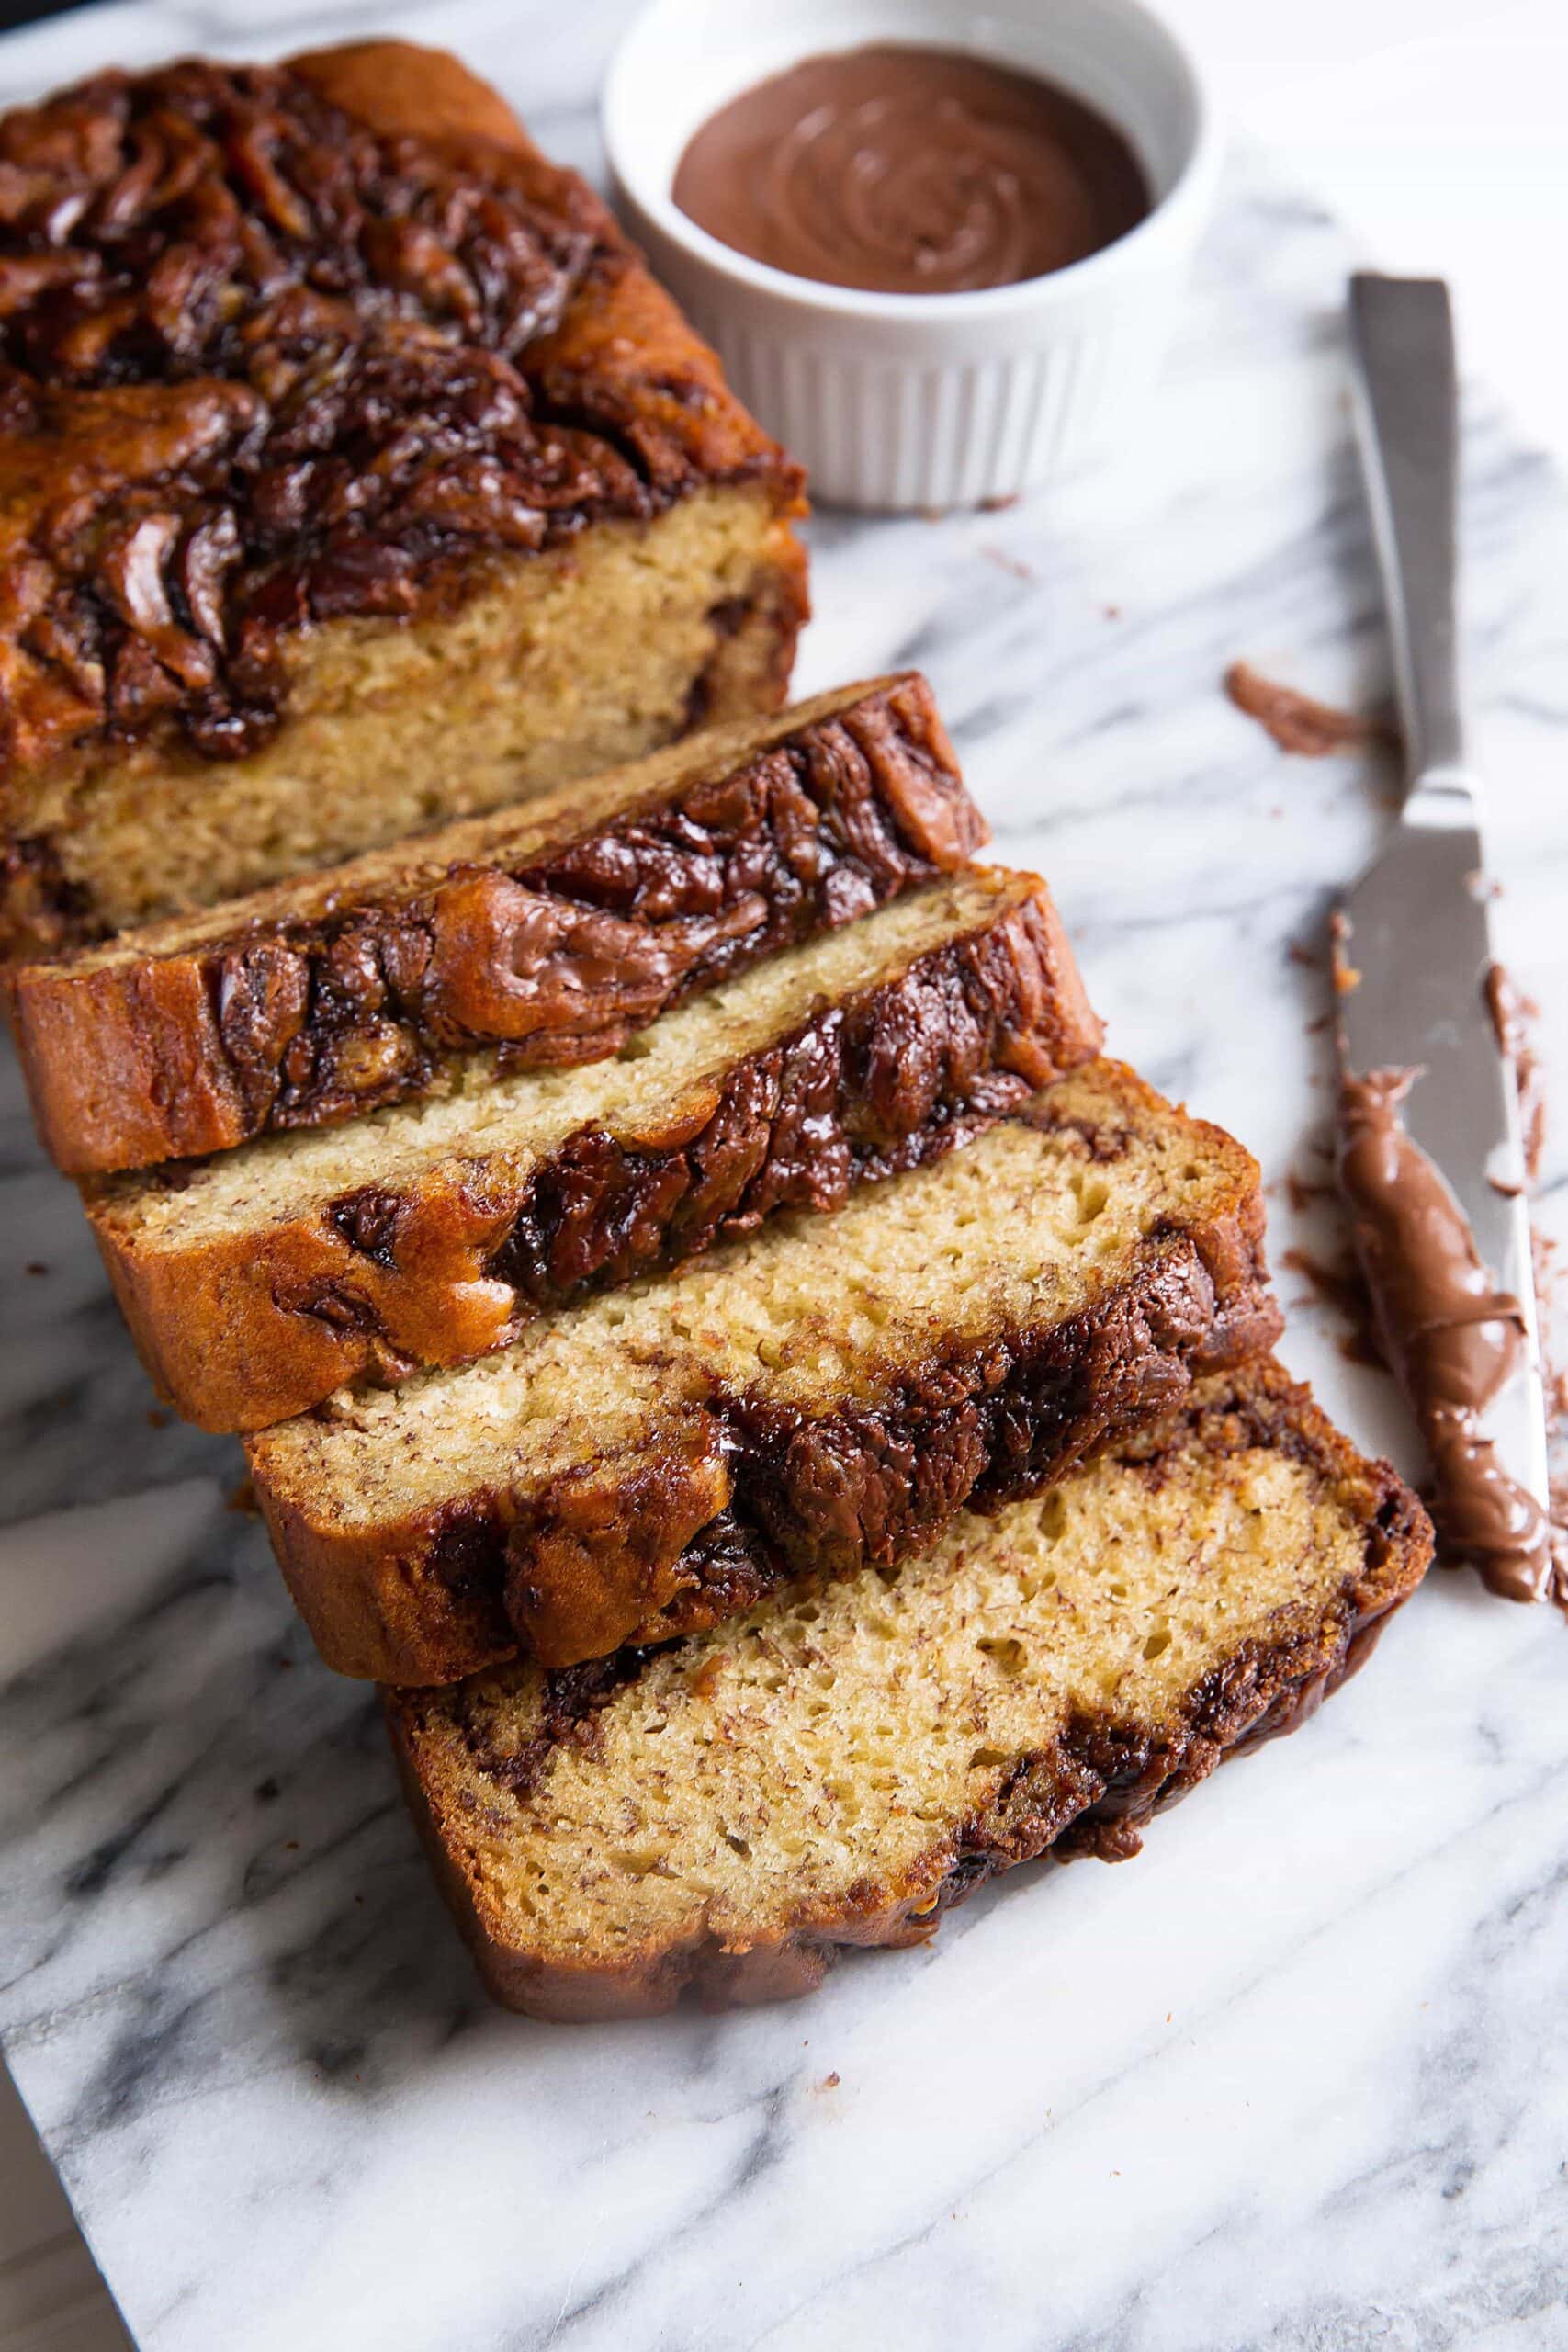 The softest banana bread you've ever had swirled with thick ribbons of Nutella. And with only 6 tablespoons of butter in the entire loaf it's practically low-fat!